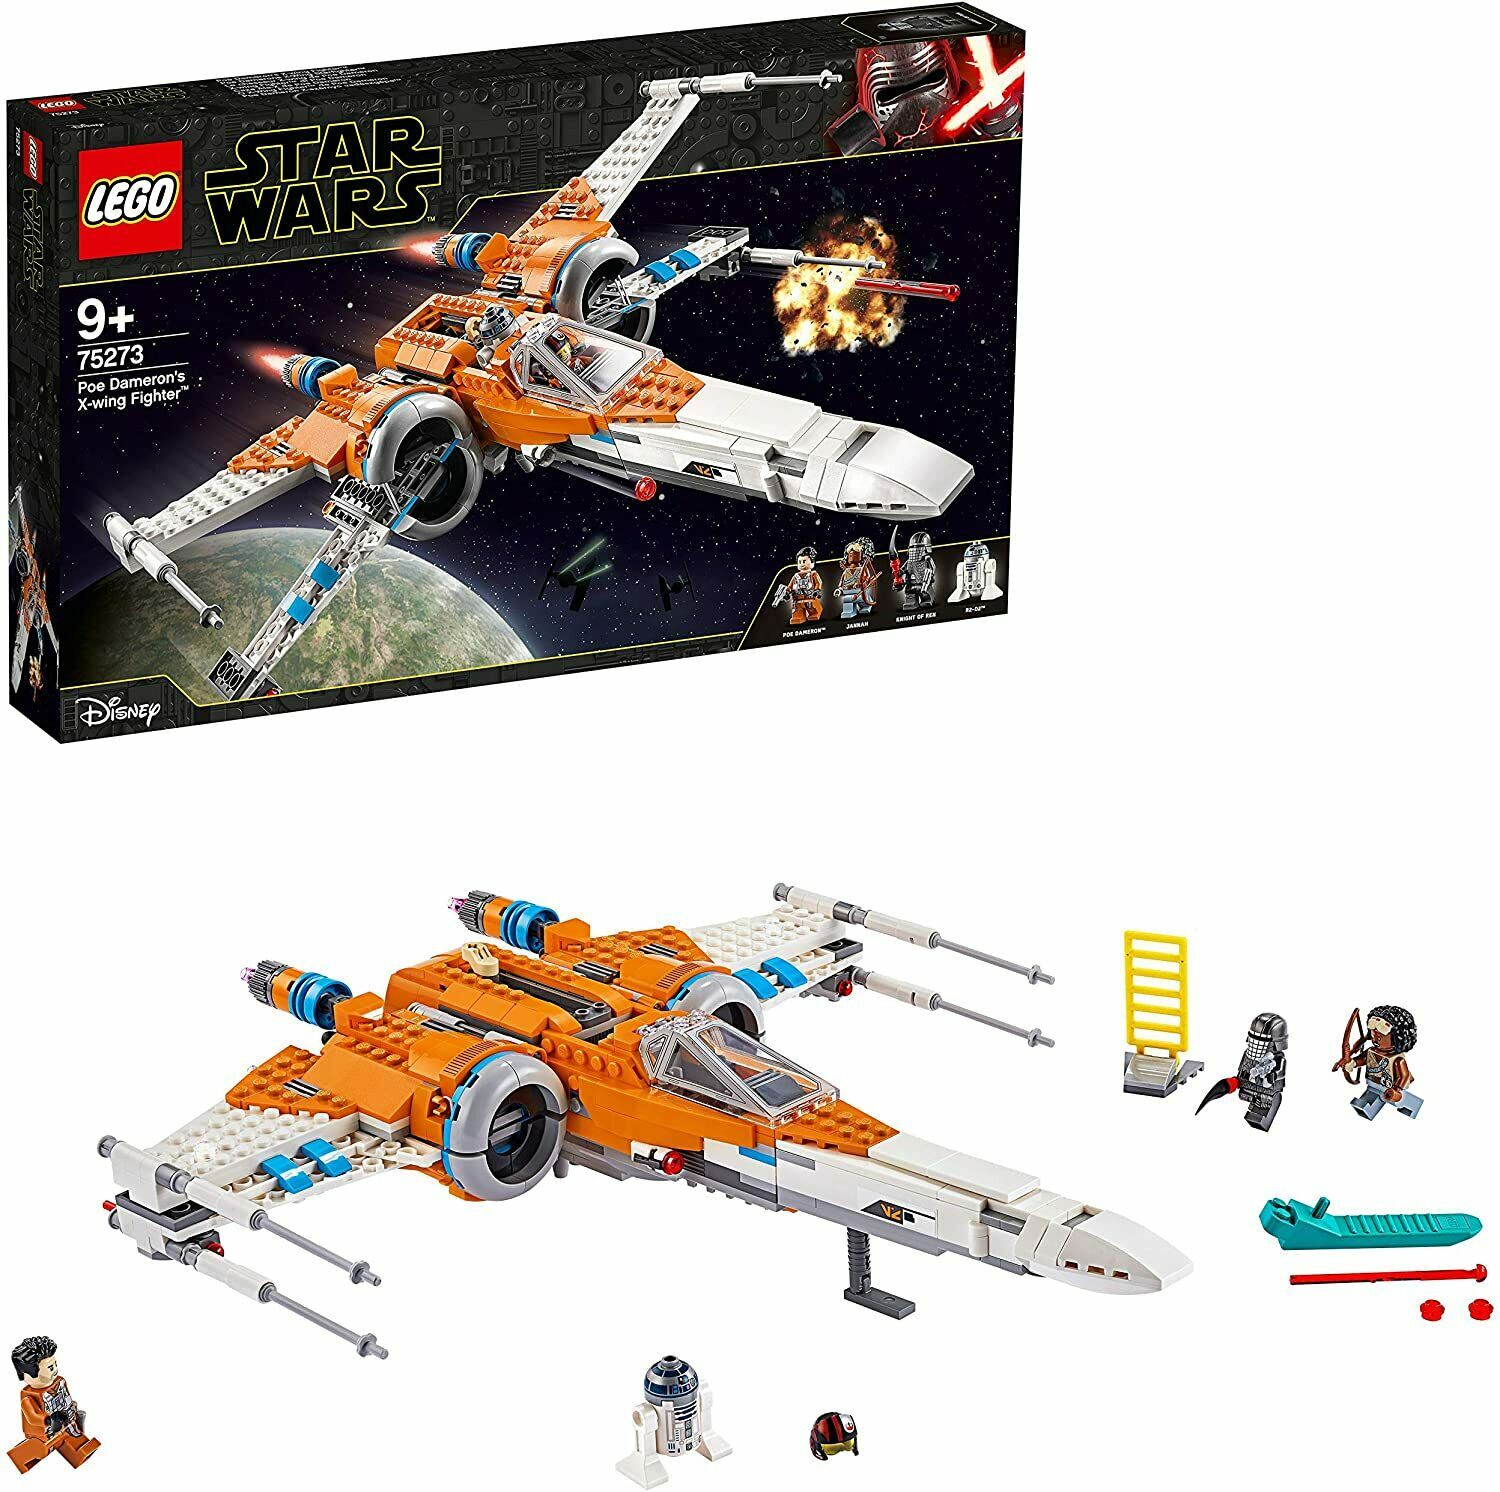 *BRAND NEW* Lego Star Wars | Poe Dameron's X-Wing Fighter | 75273 | IN STOCK